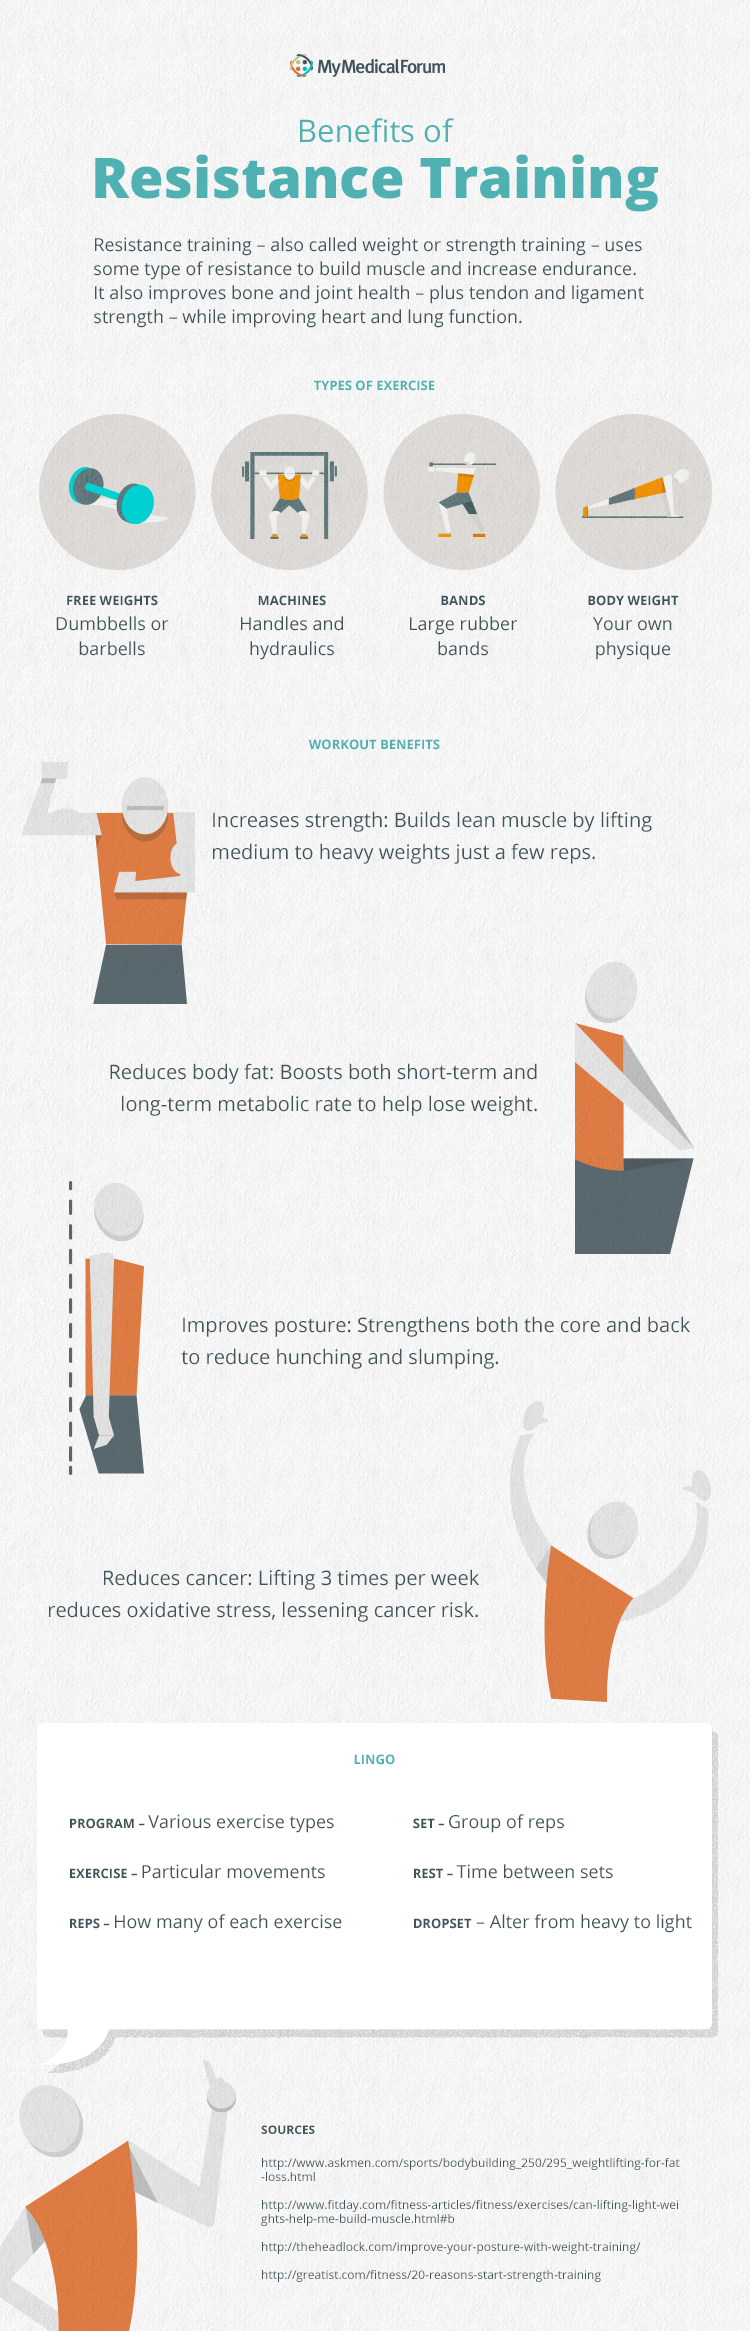 Benefits-of-weight-training-infographic